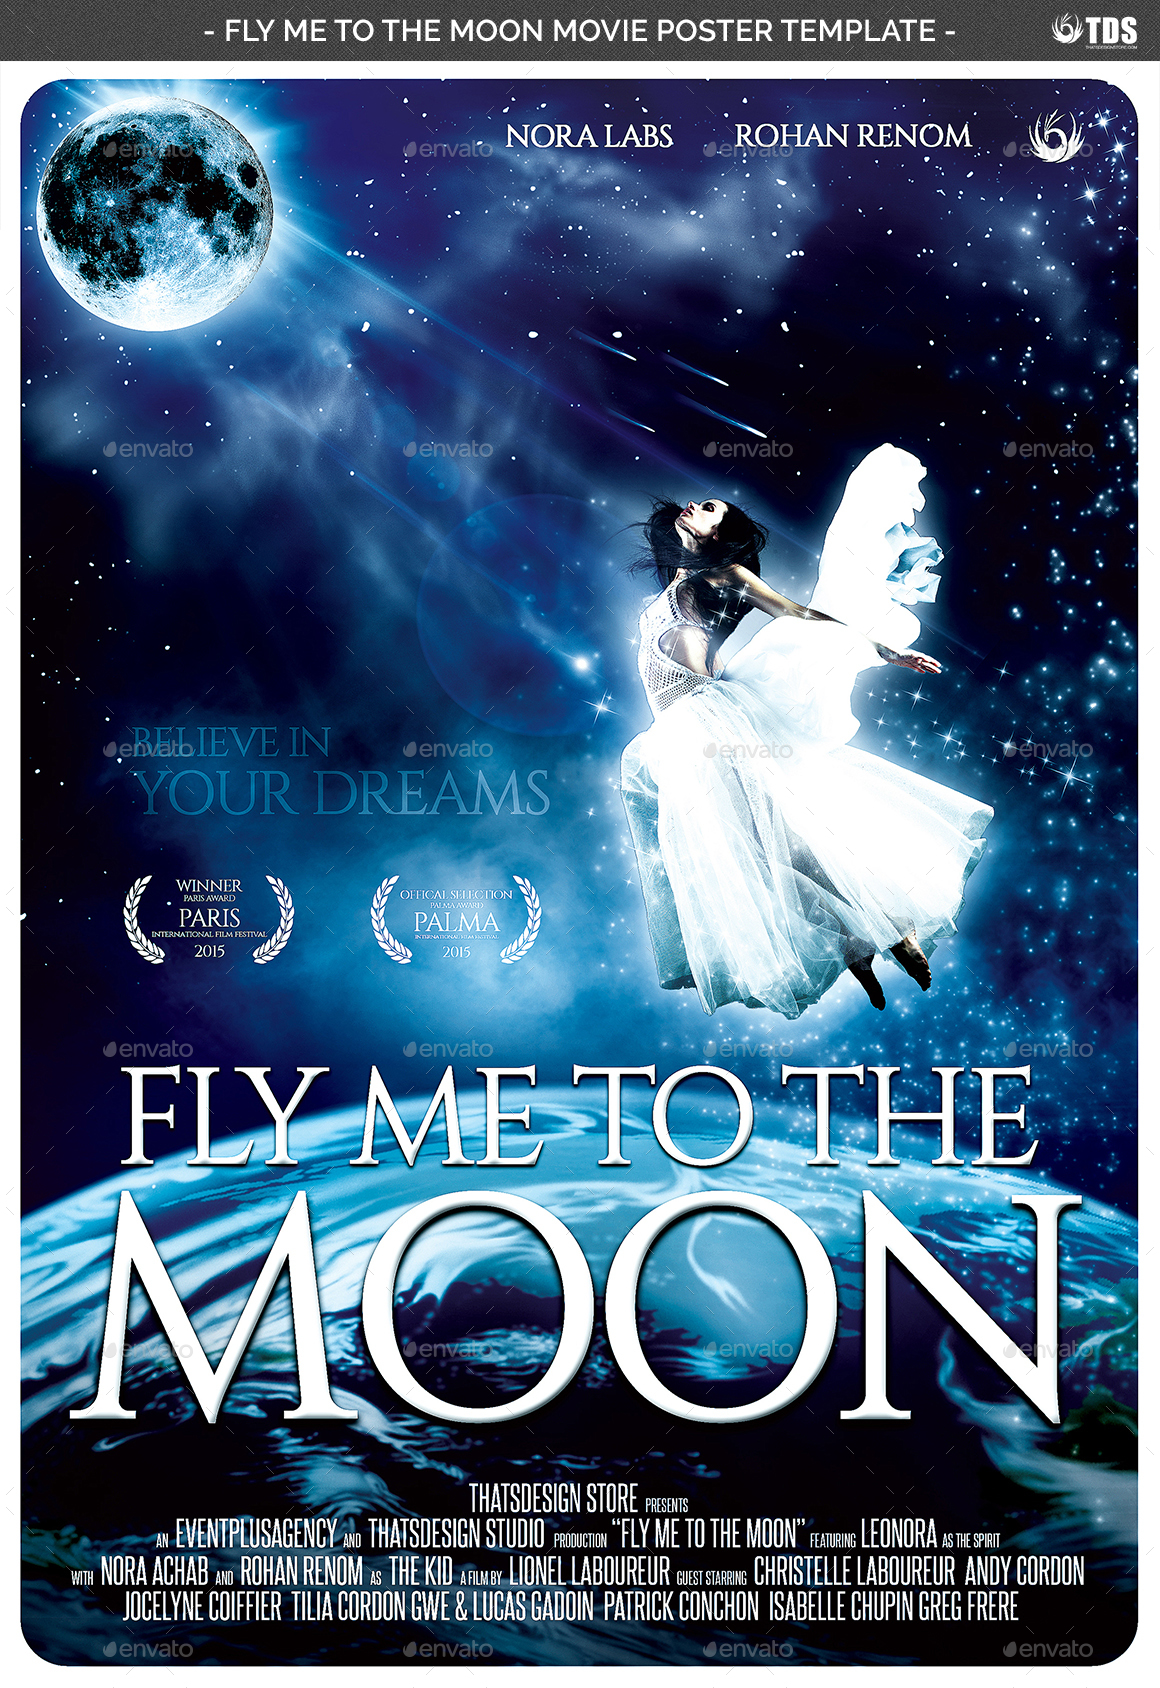 Fly Me to the Moon Movie Poster Template by lou606 GraphicRiver